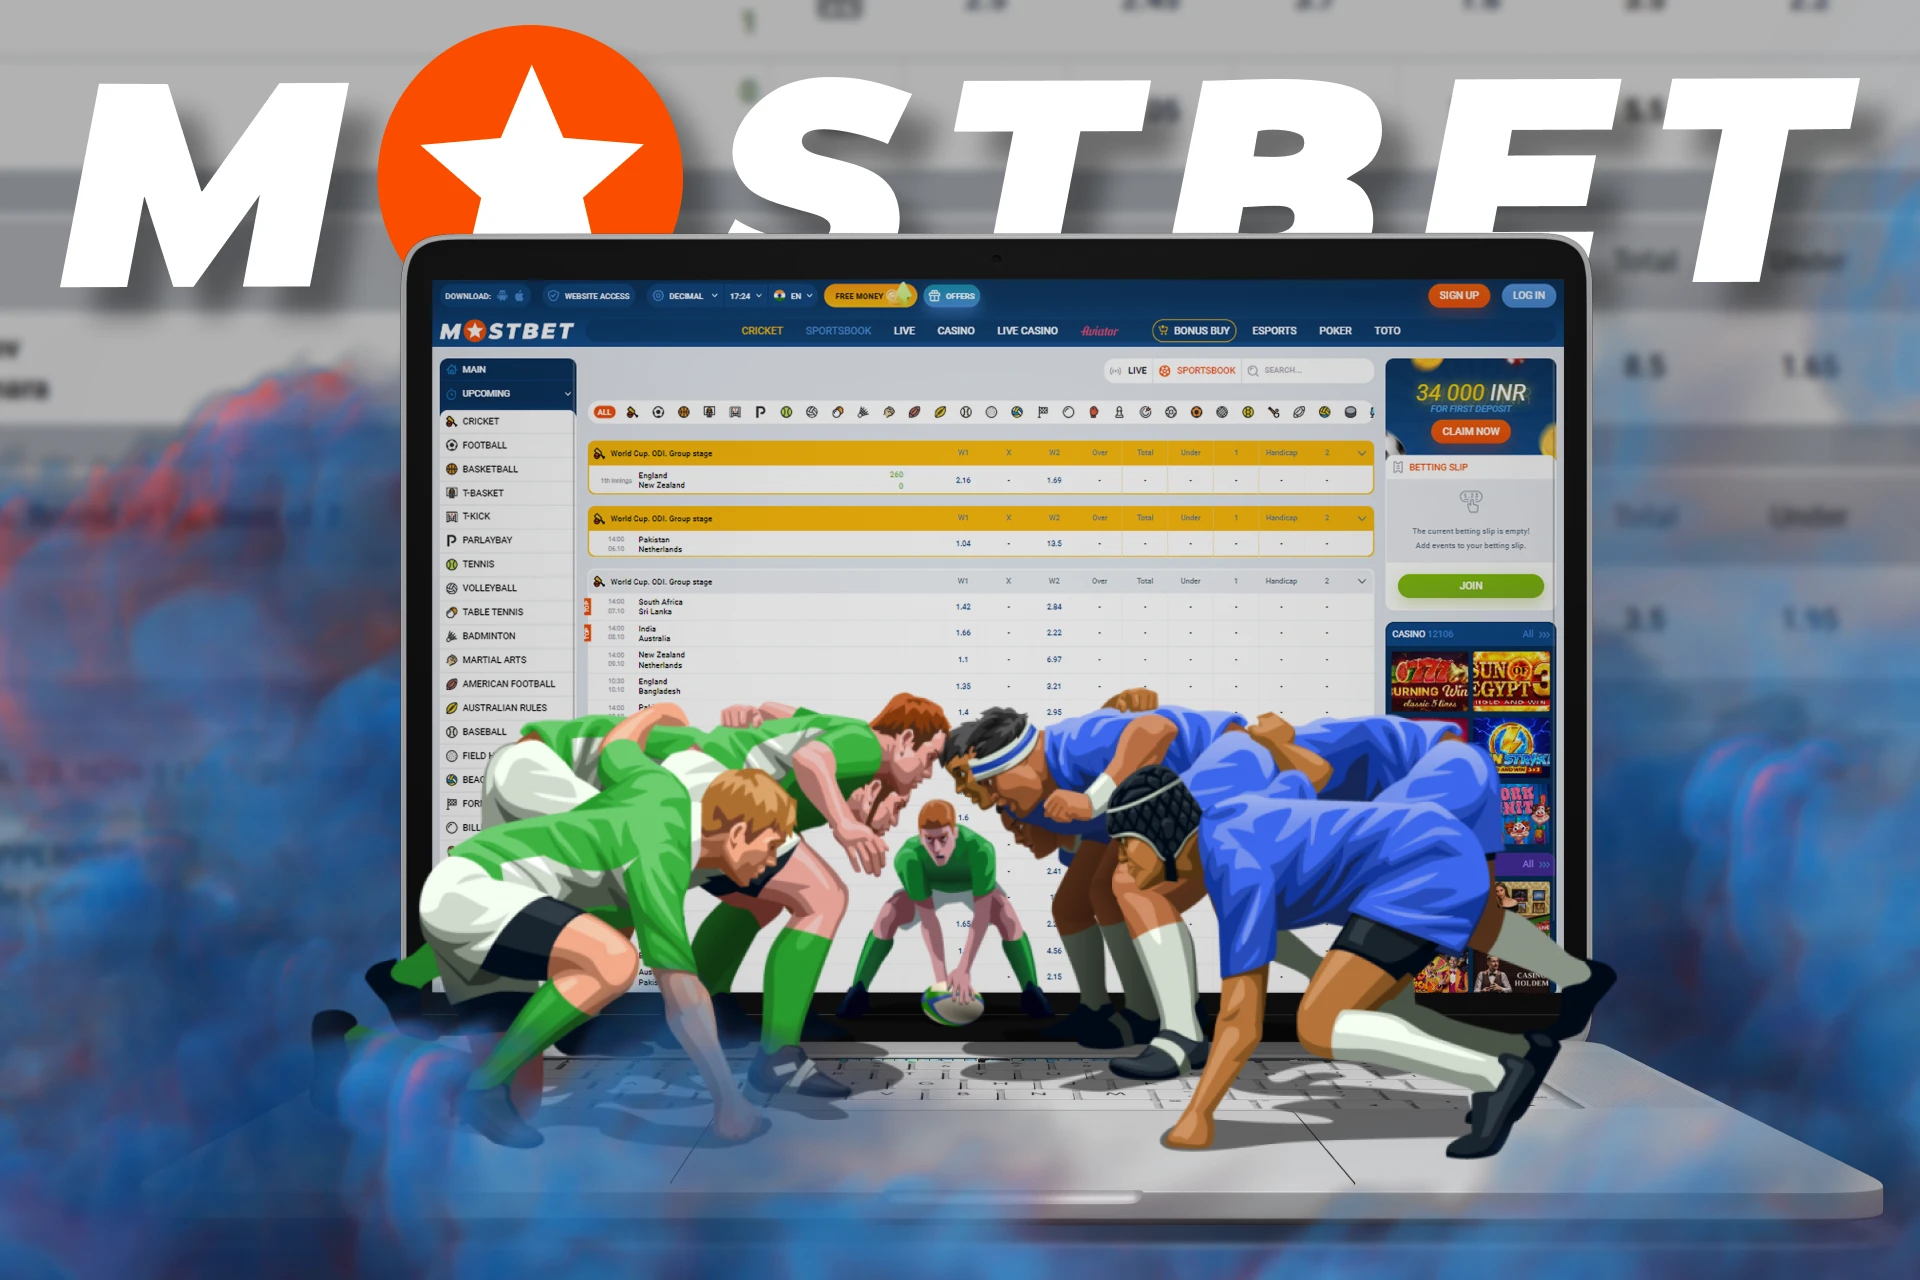 Try following these tips for kabaddi betting in Mostbet.